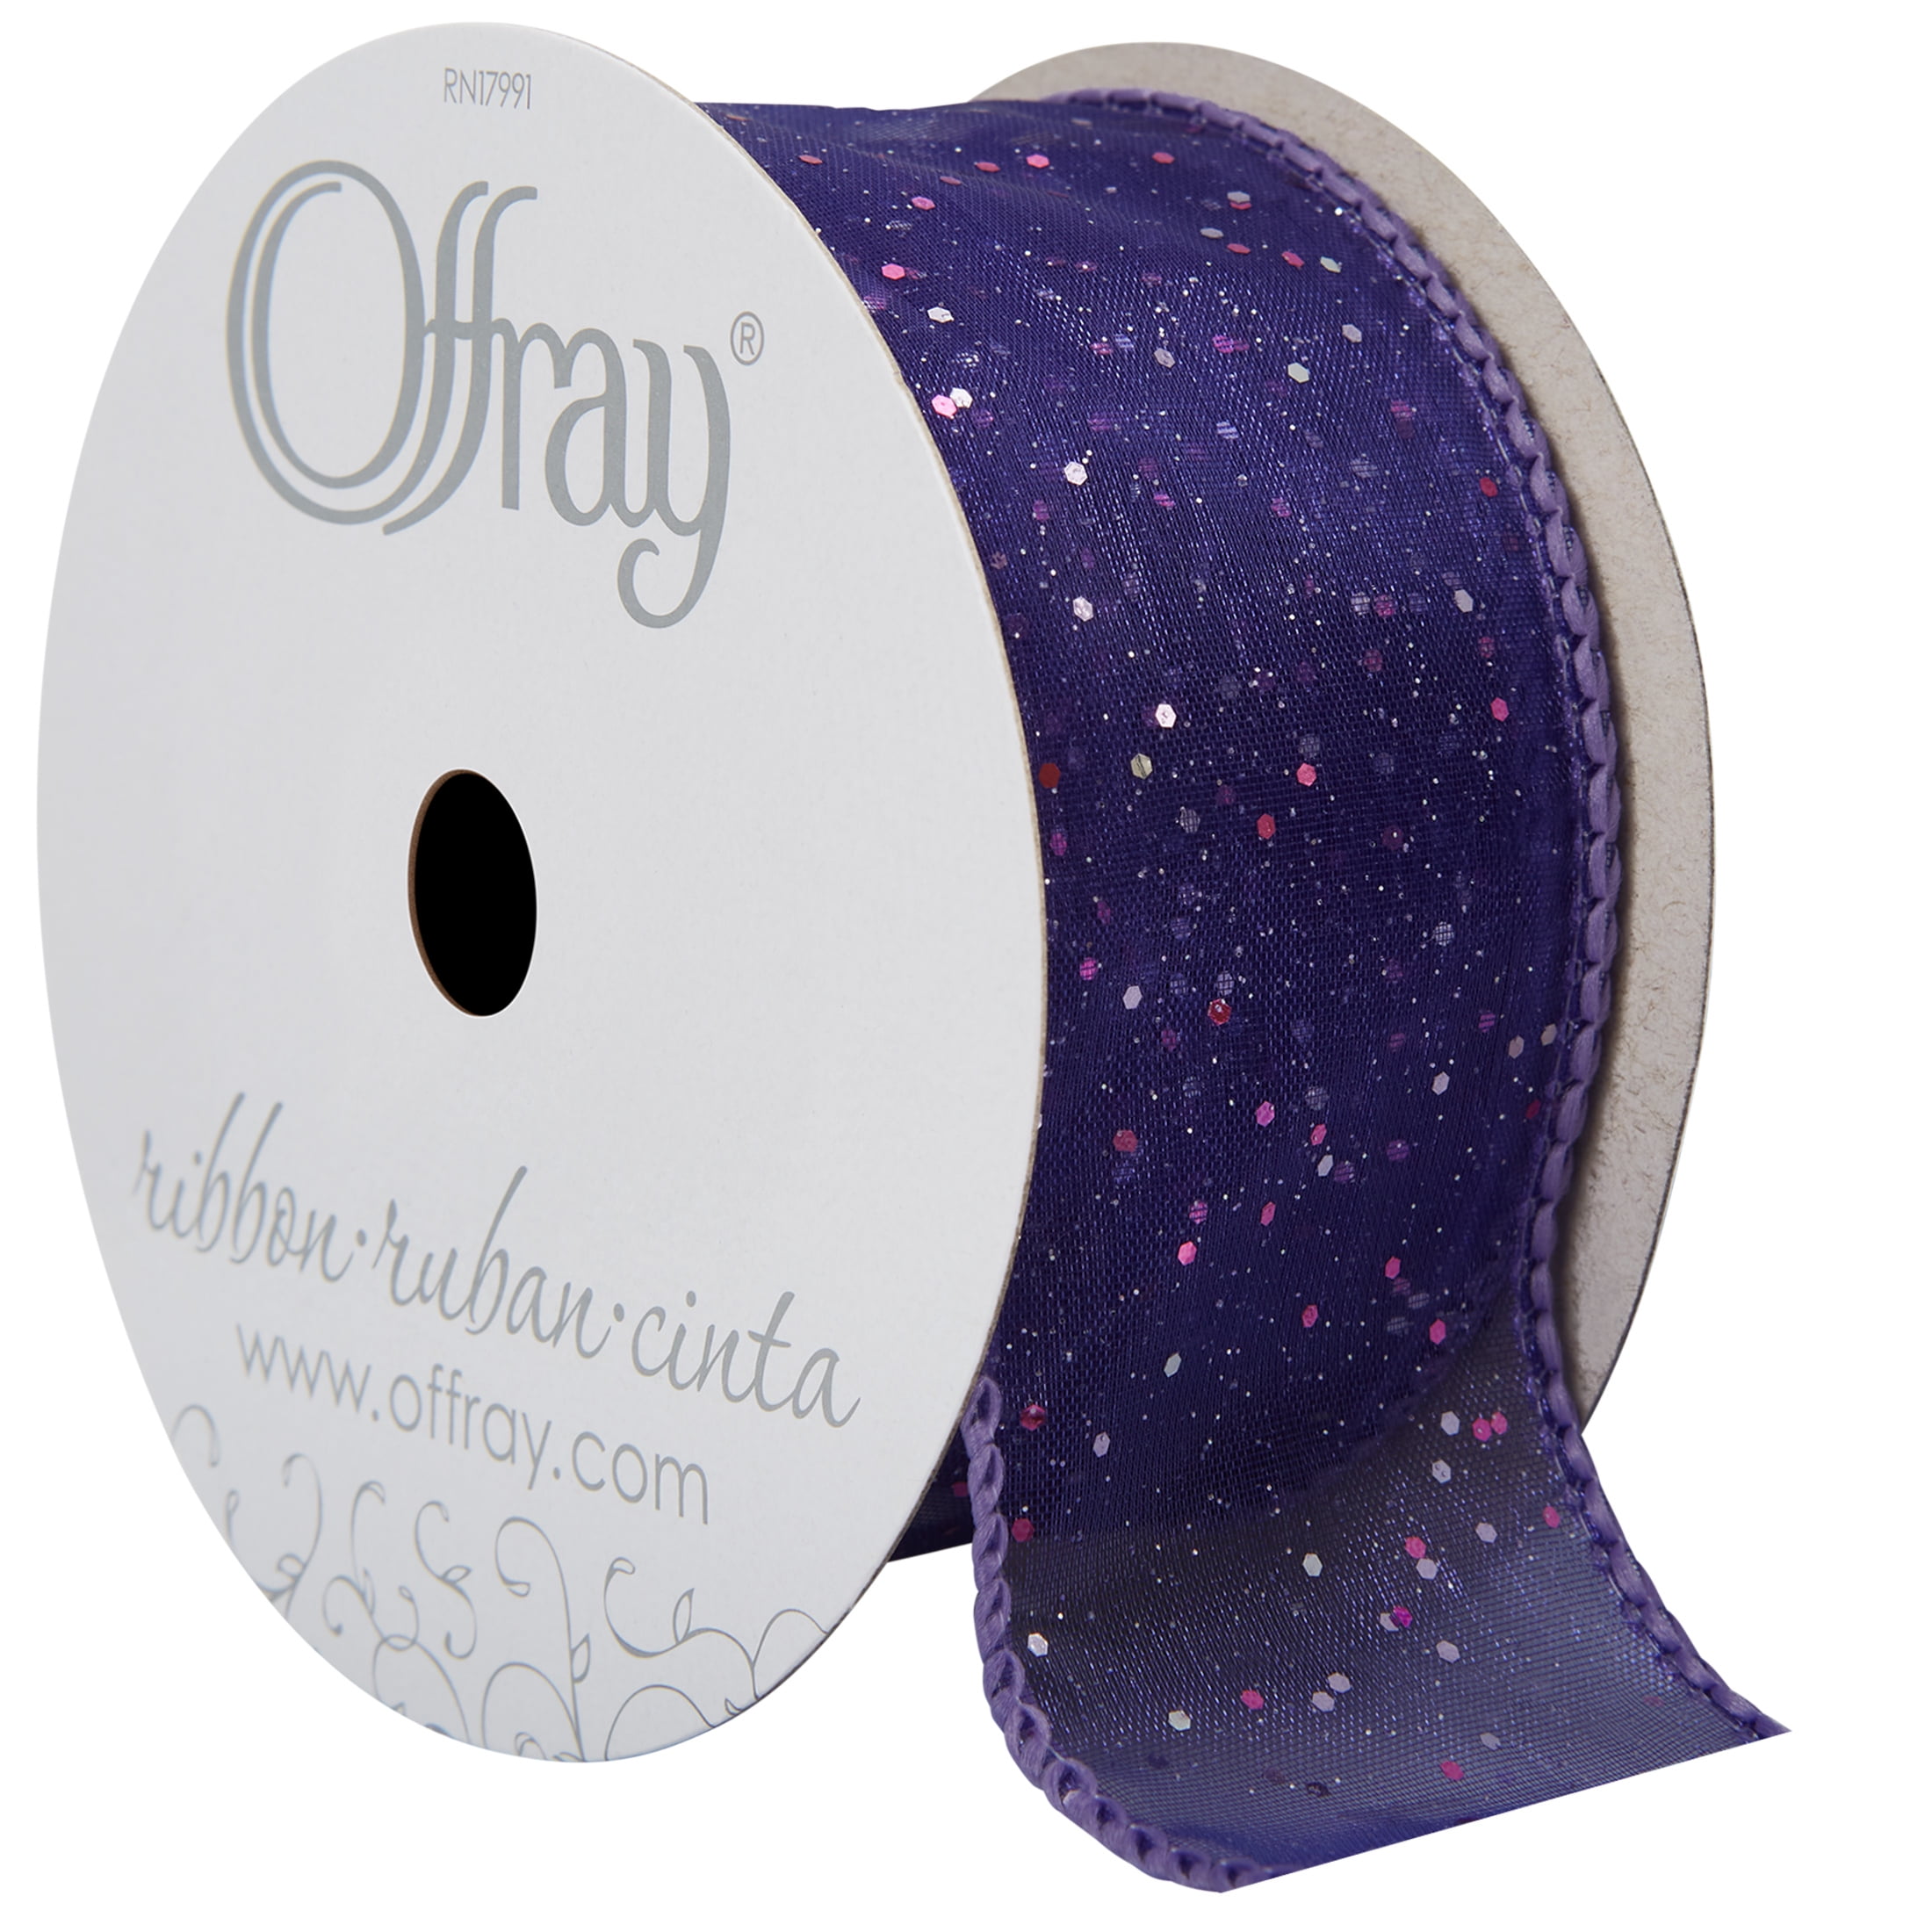 Offray Ribbon, Lavender Purple 2 1/2 inch Wired Edge Sheer Metallic Ribbon  for Wedding, Crafts, and Gifting, 9 feet, 1 Each - DroneUp Delivery